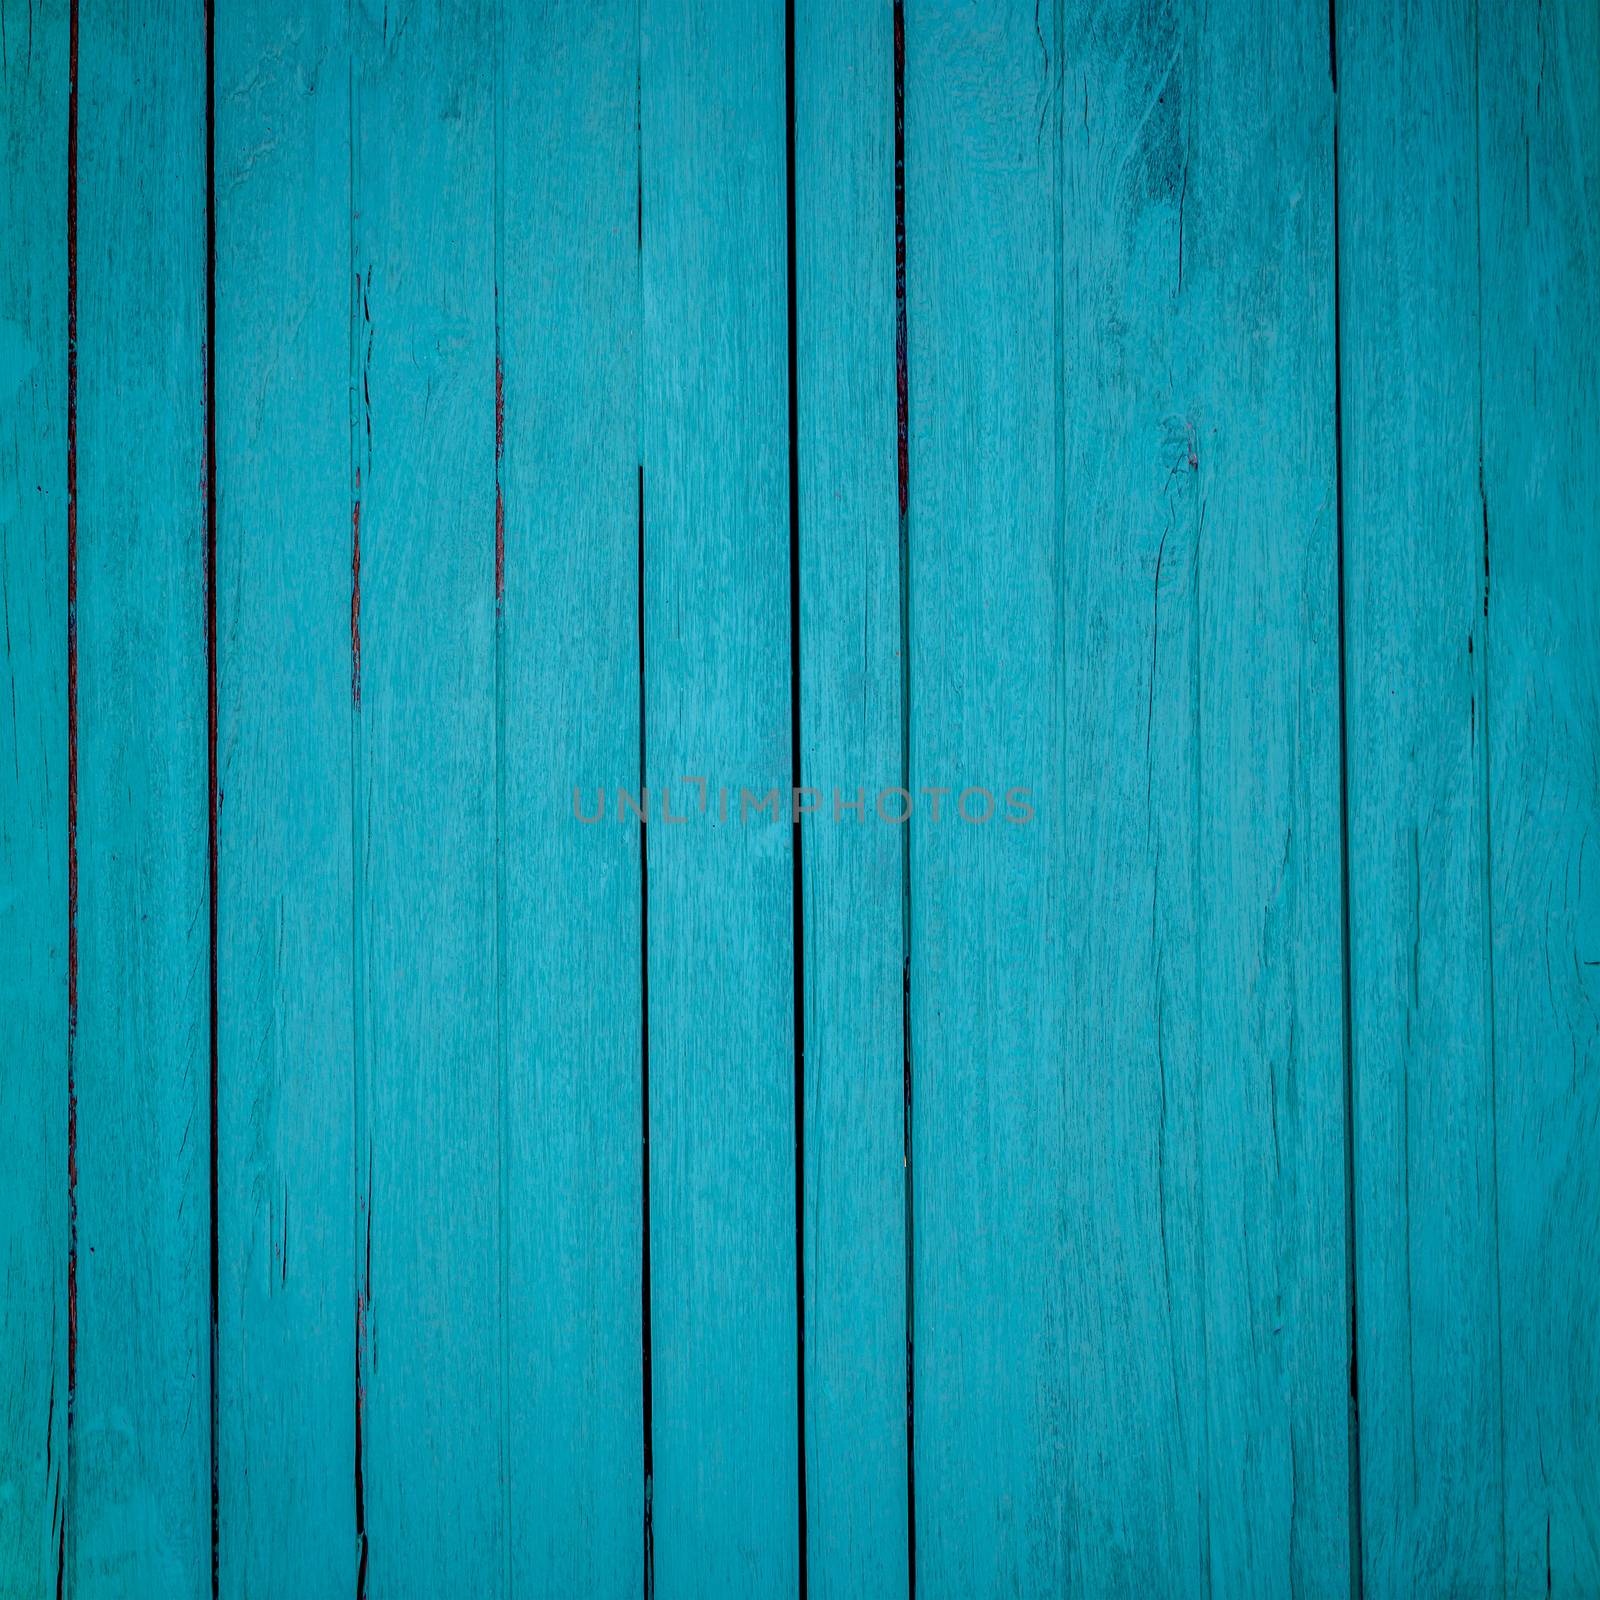 The fence of the Board is painted in turquoise background color or texture